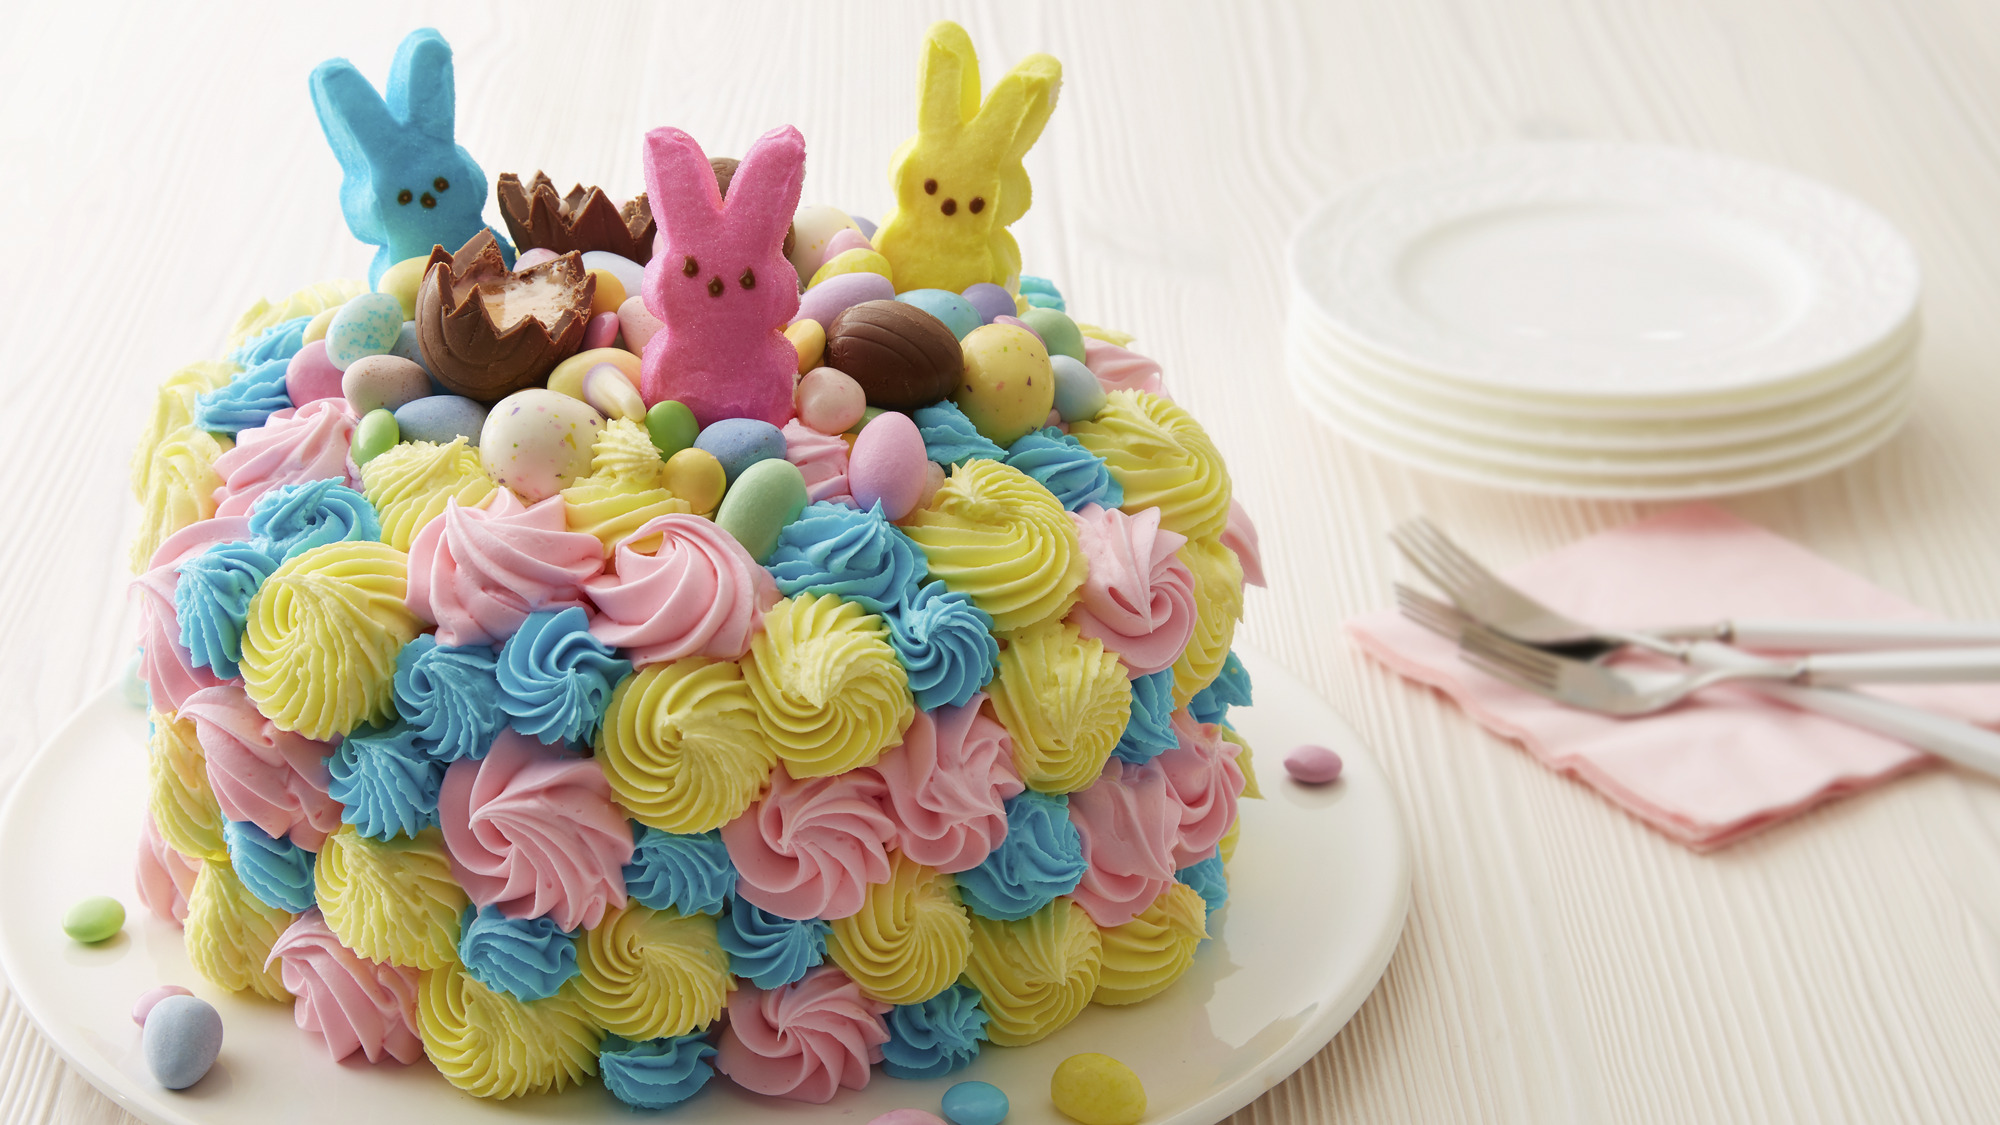 This Easter Basket Cake Will Make Easter Even More Fun And Delicious